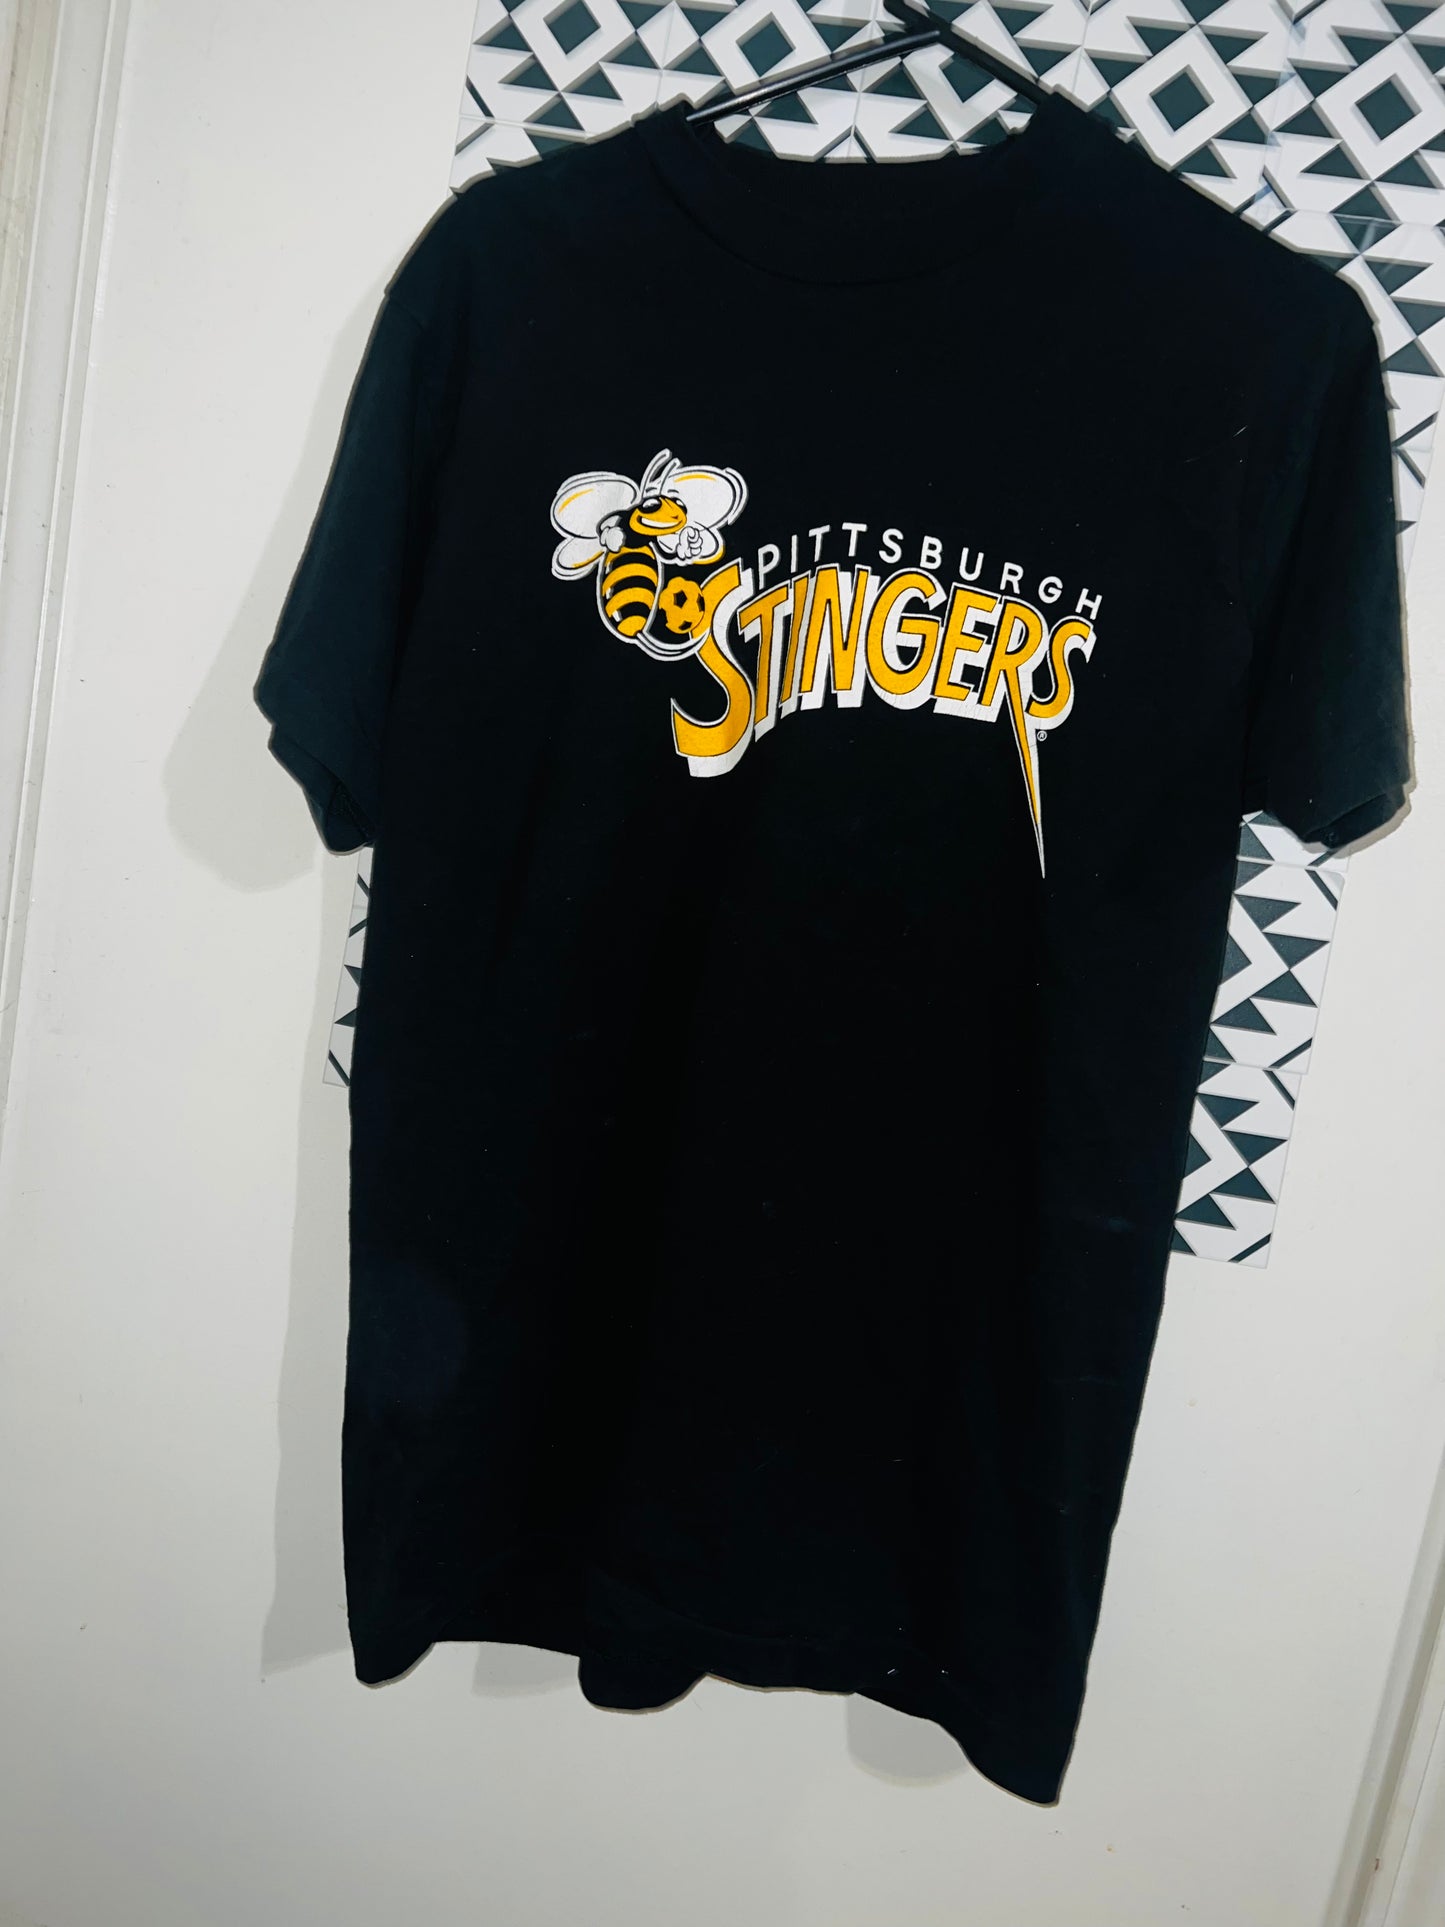 Vintage 94-95 Pittsburgh Stingers Soccer Oversized Distressed Tee